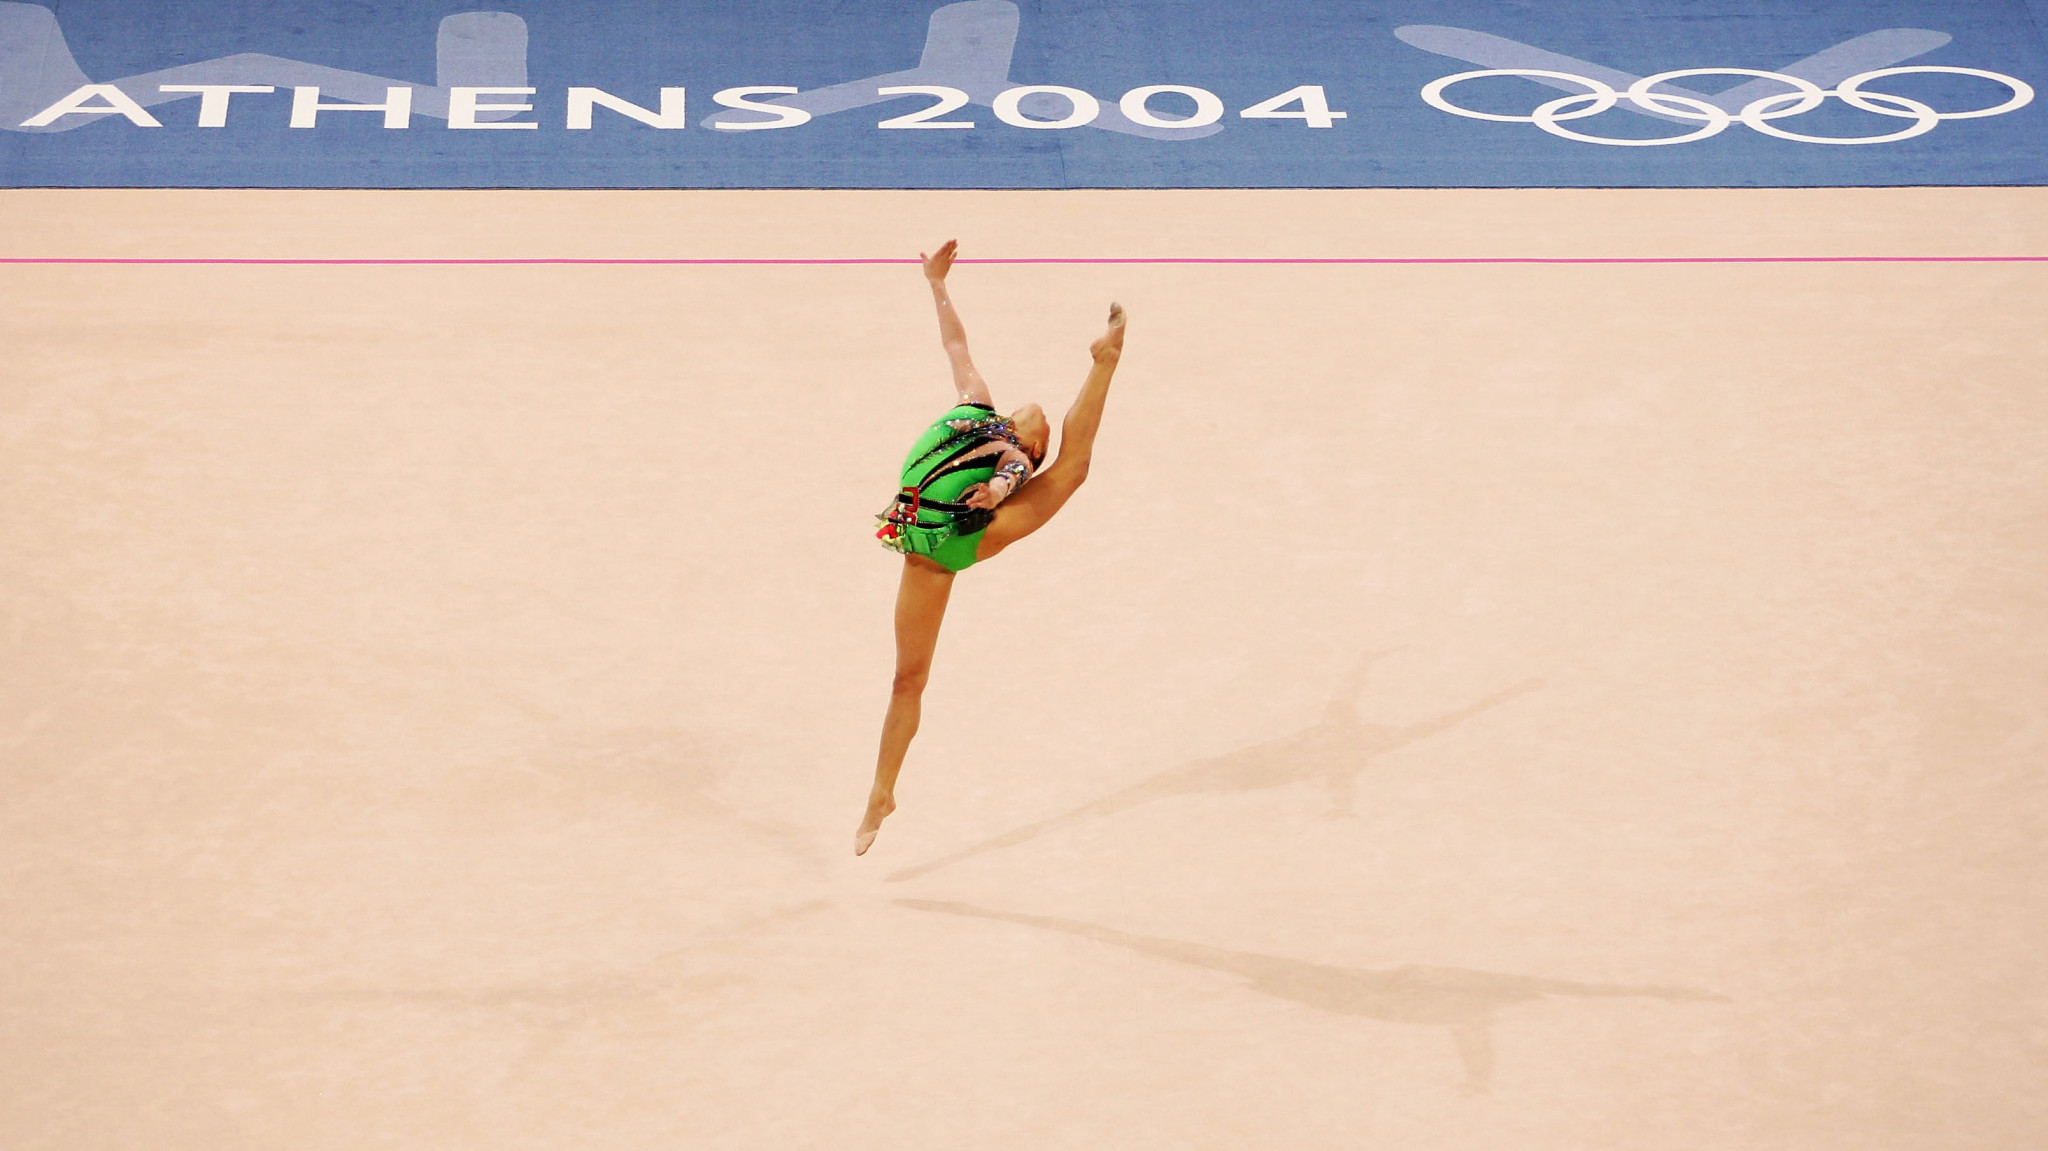 Alina Kabaeva won a gold medal at the Athens 2004 Olympic Games for Russia ©Getty Images